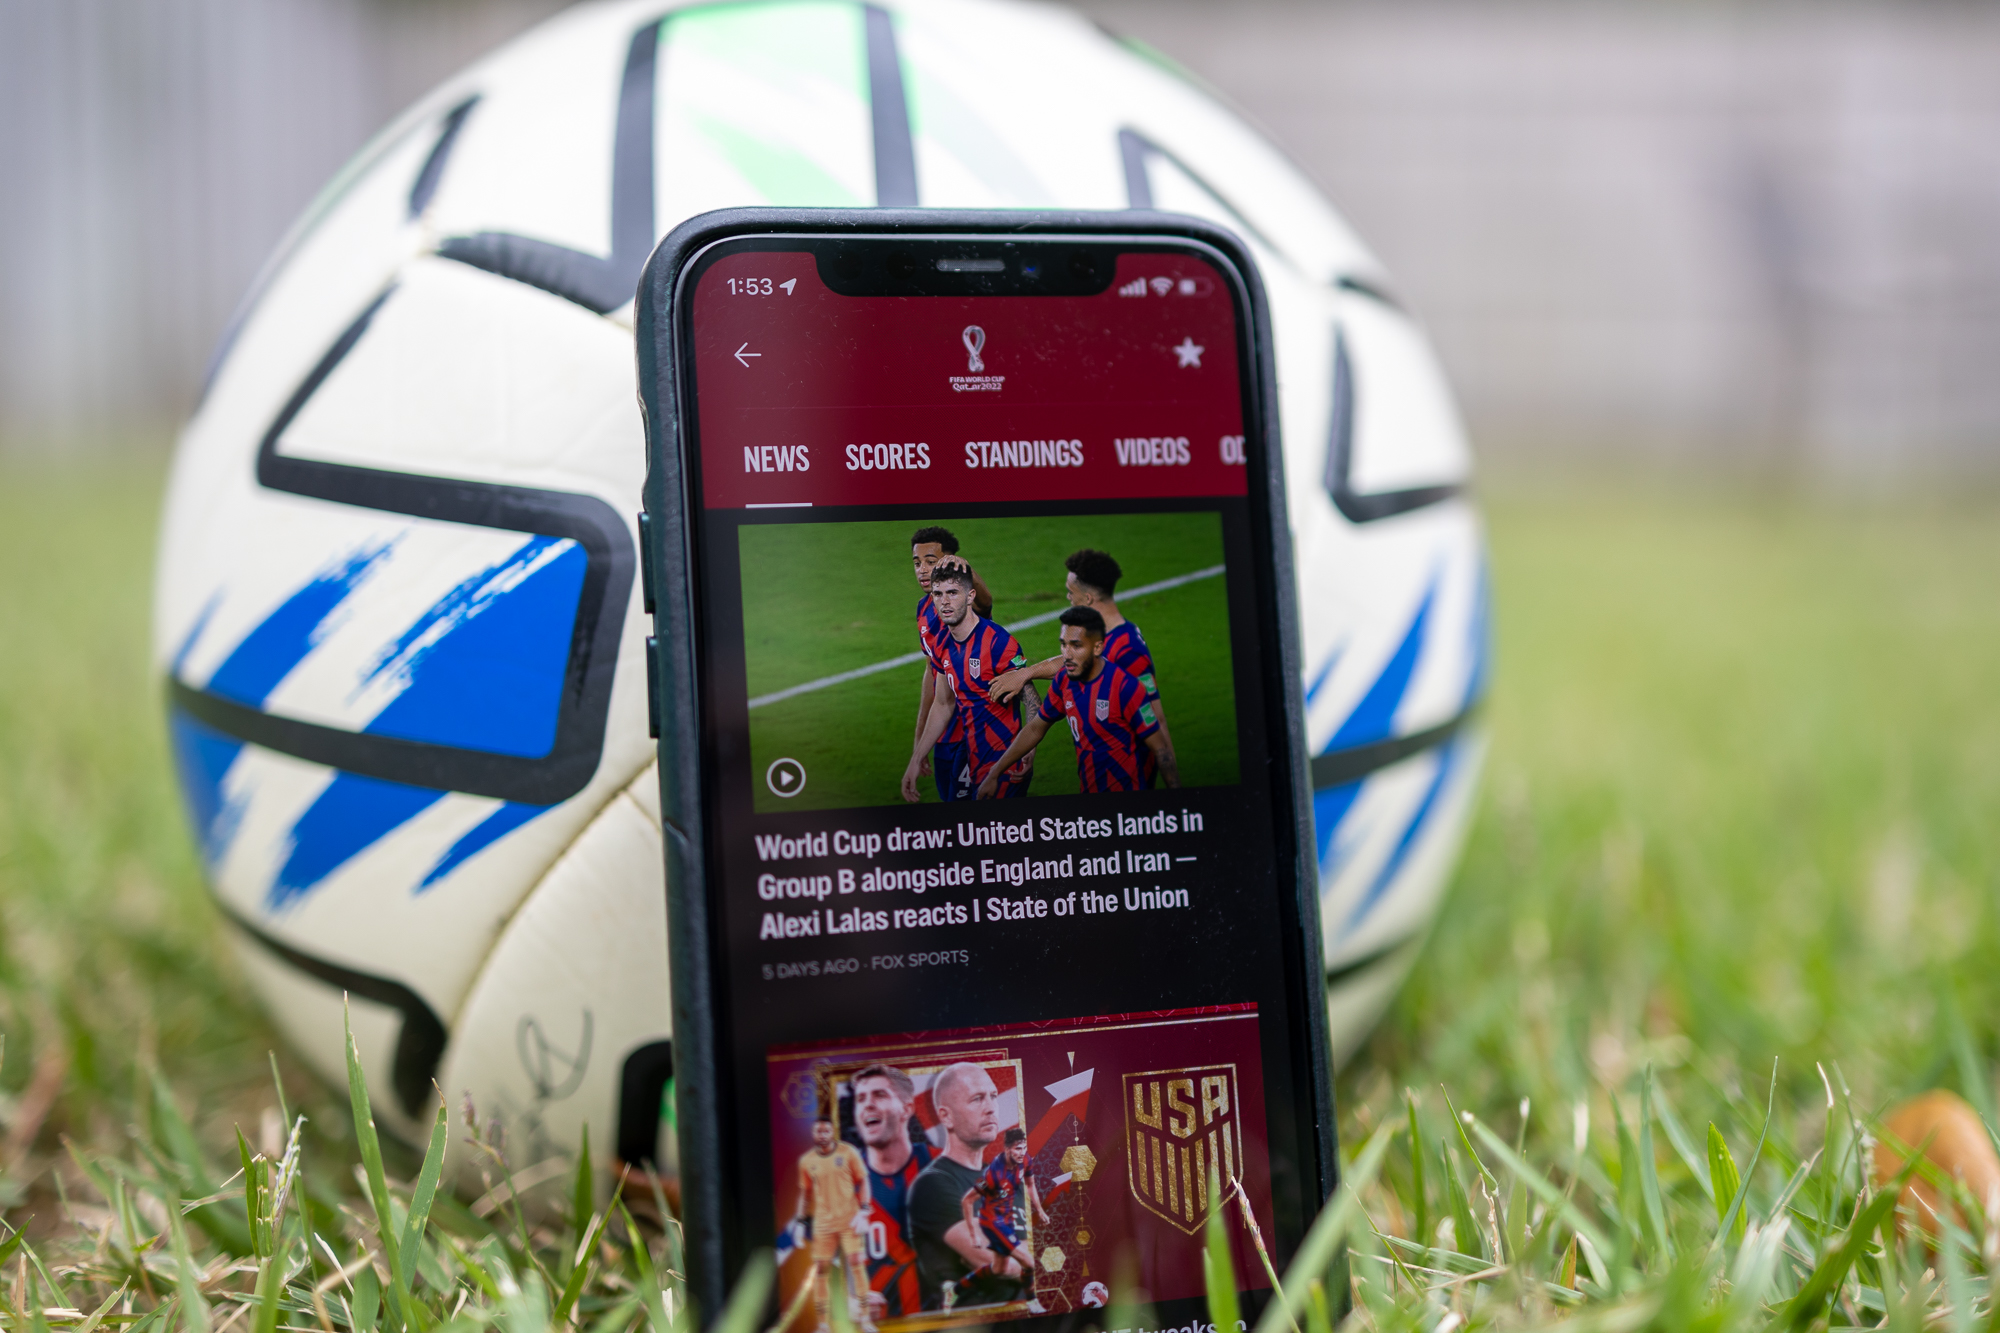 How Can I Watch Live Soccer Games on My Iphone 